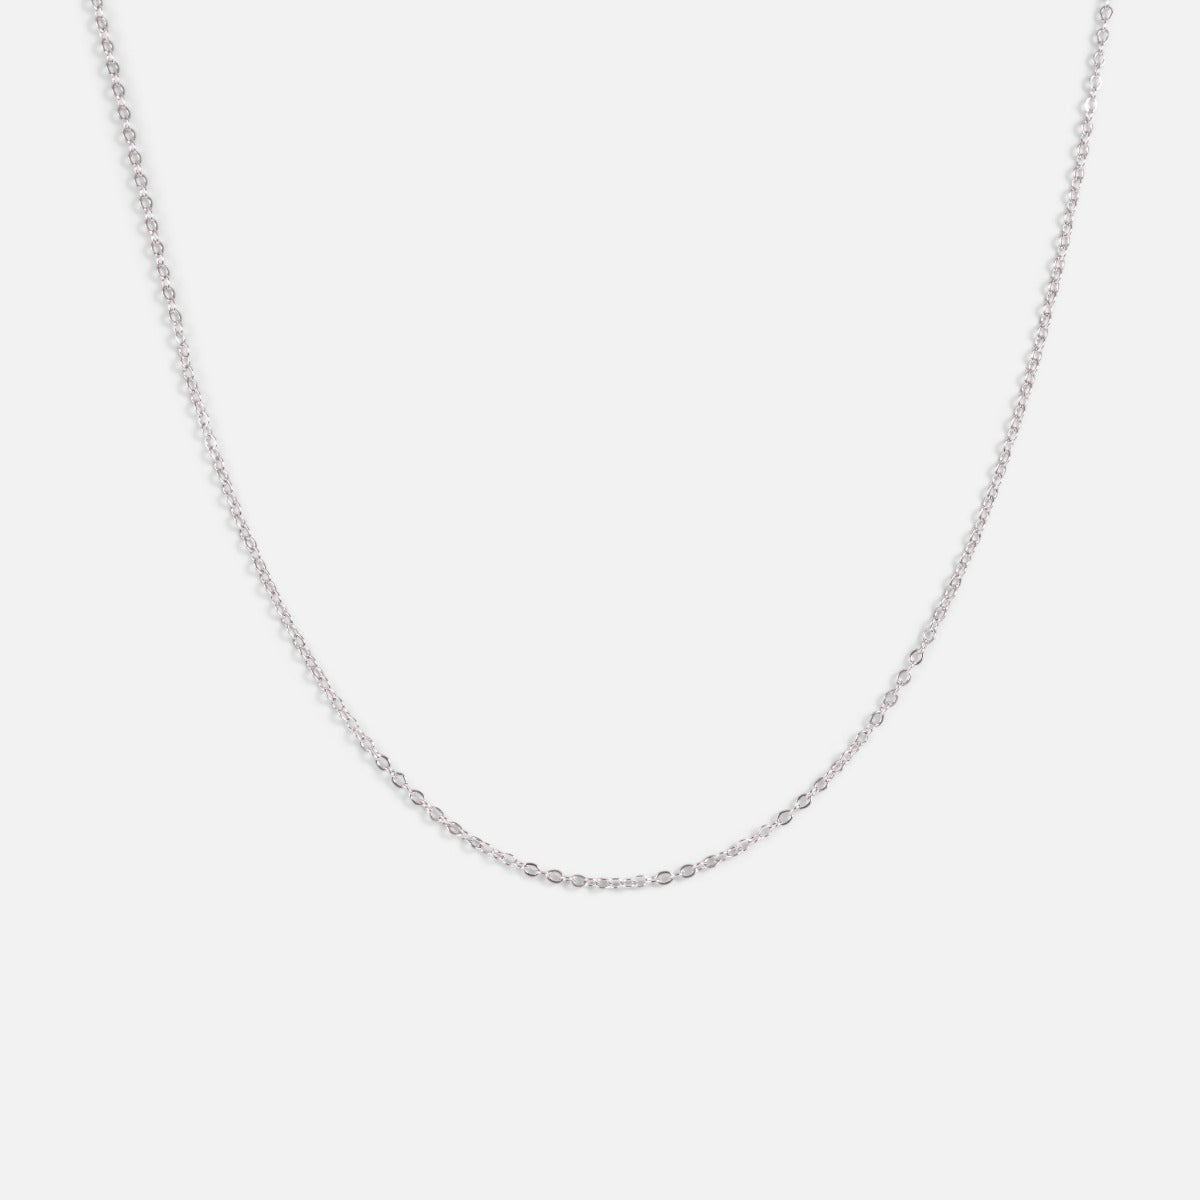 Thin silvered stainless steel chain (18’’)